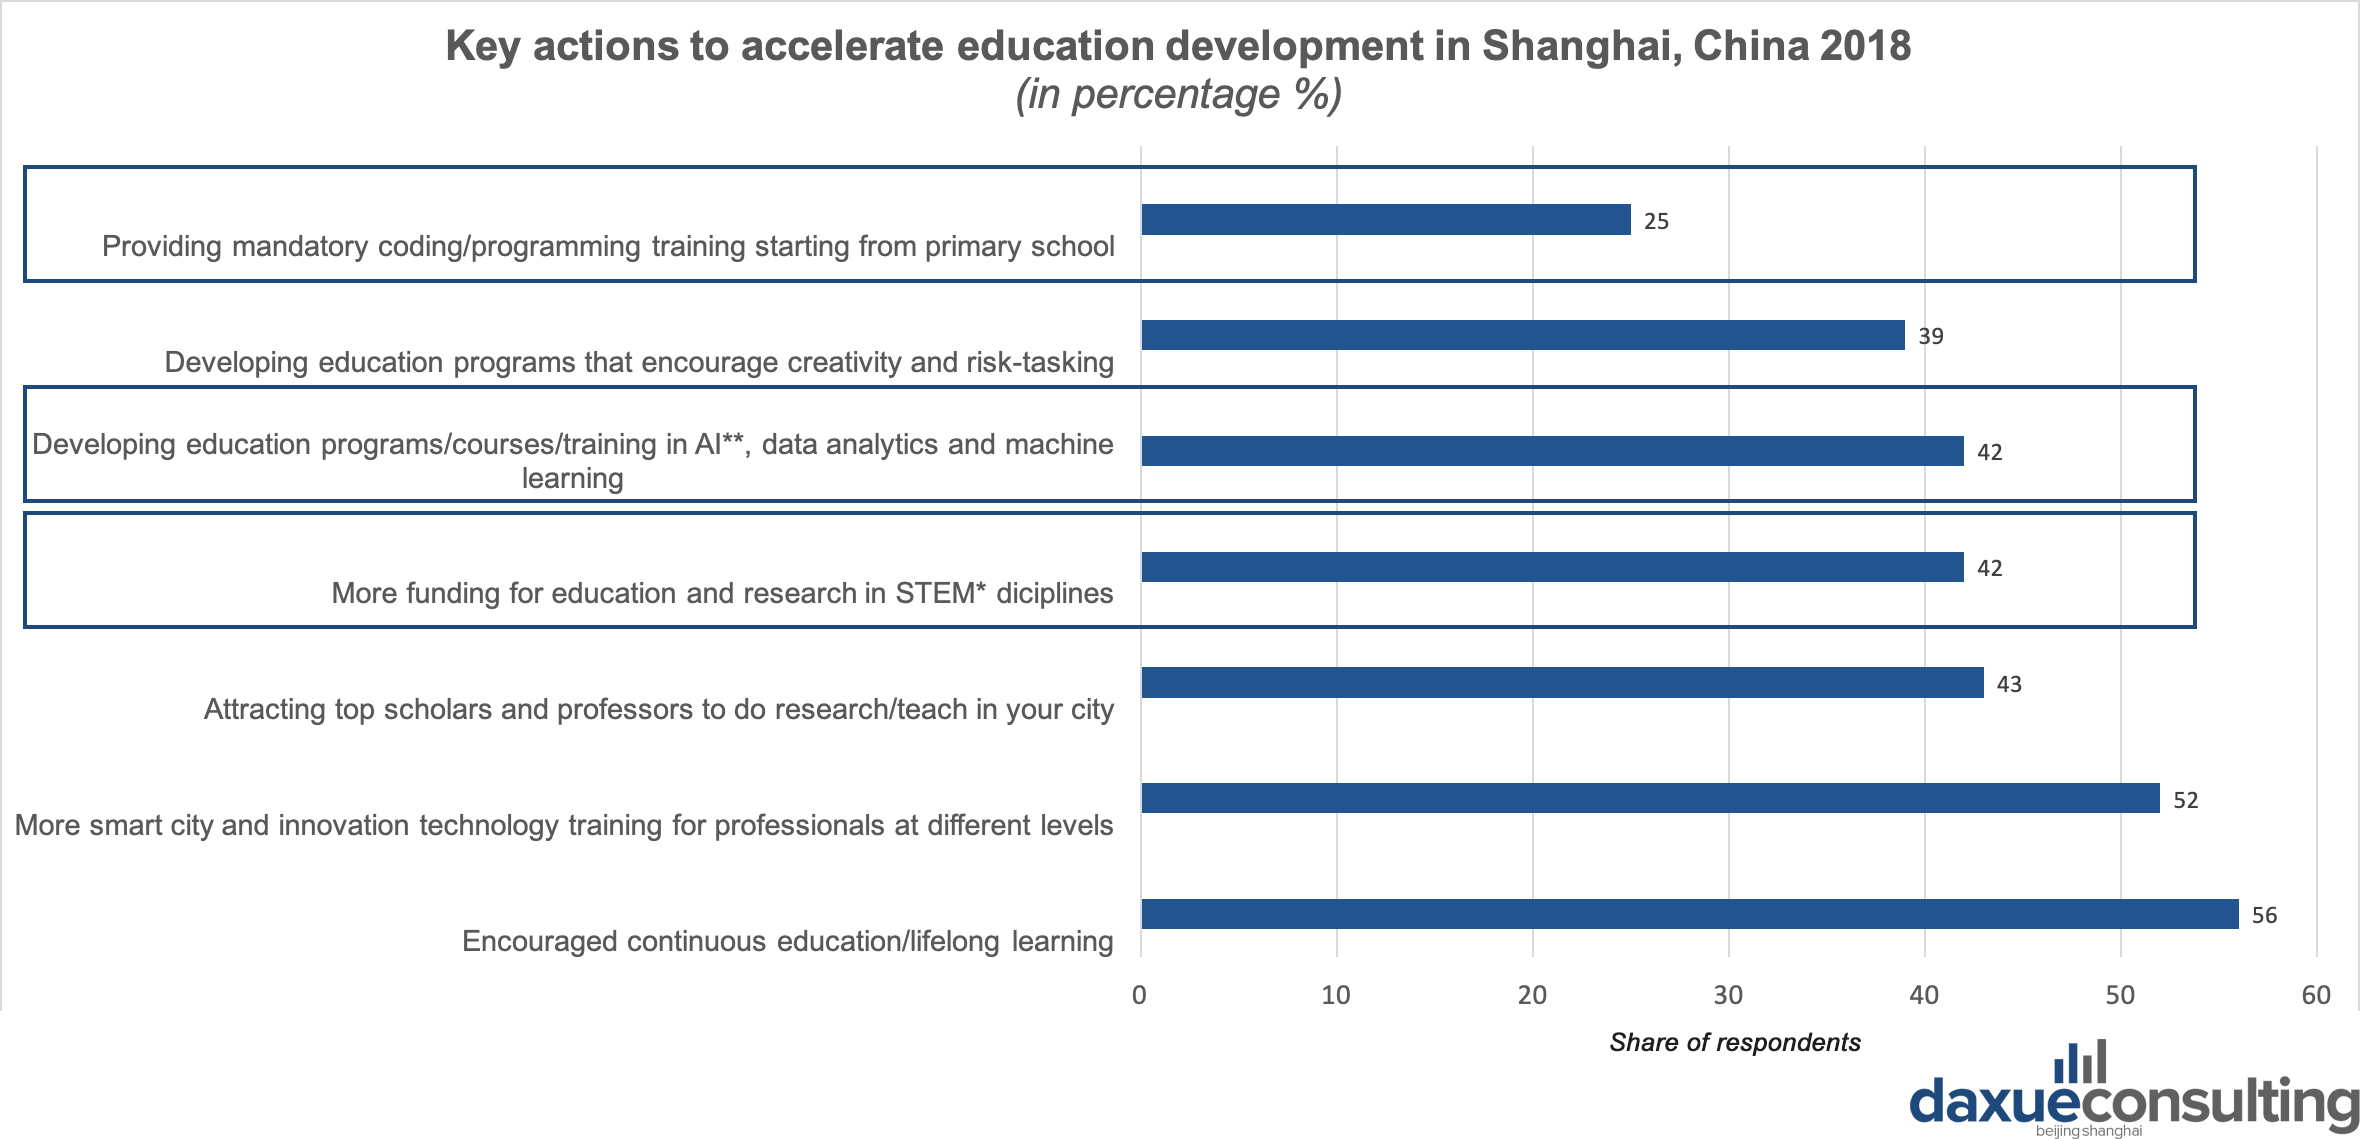 A survey results show that code/programming training starting from primary school as well as data analytics training and STEM education are considered to be the key accelerators for education development in Shanghai, China.    